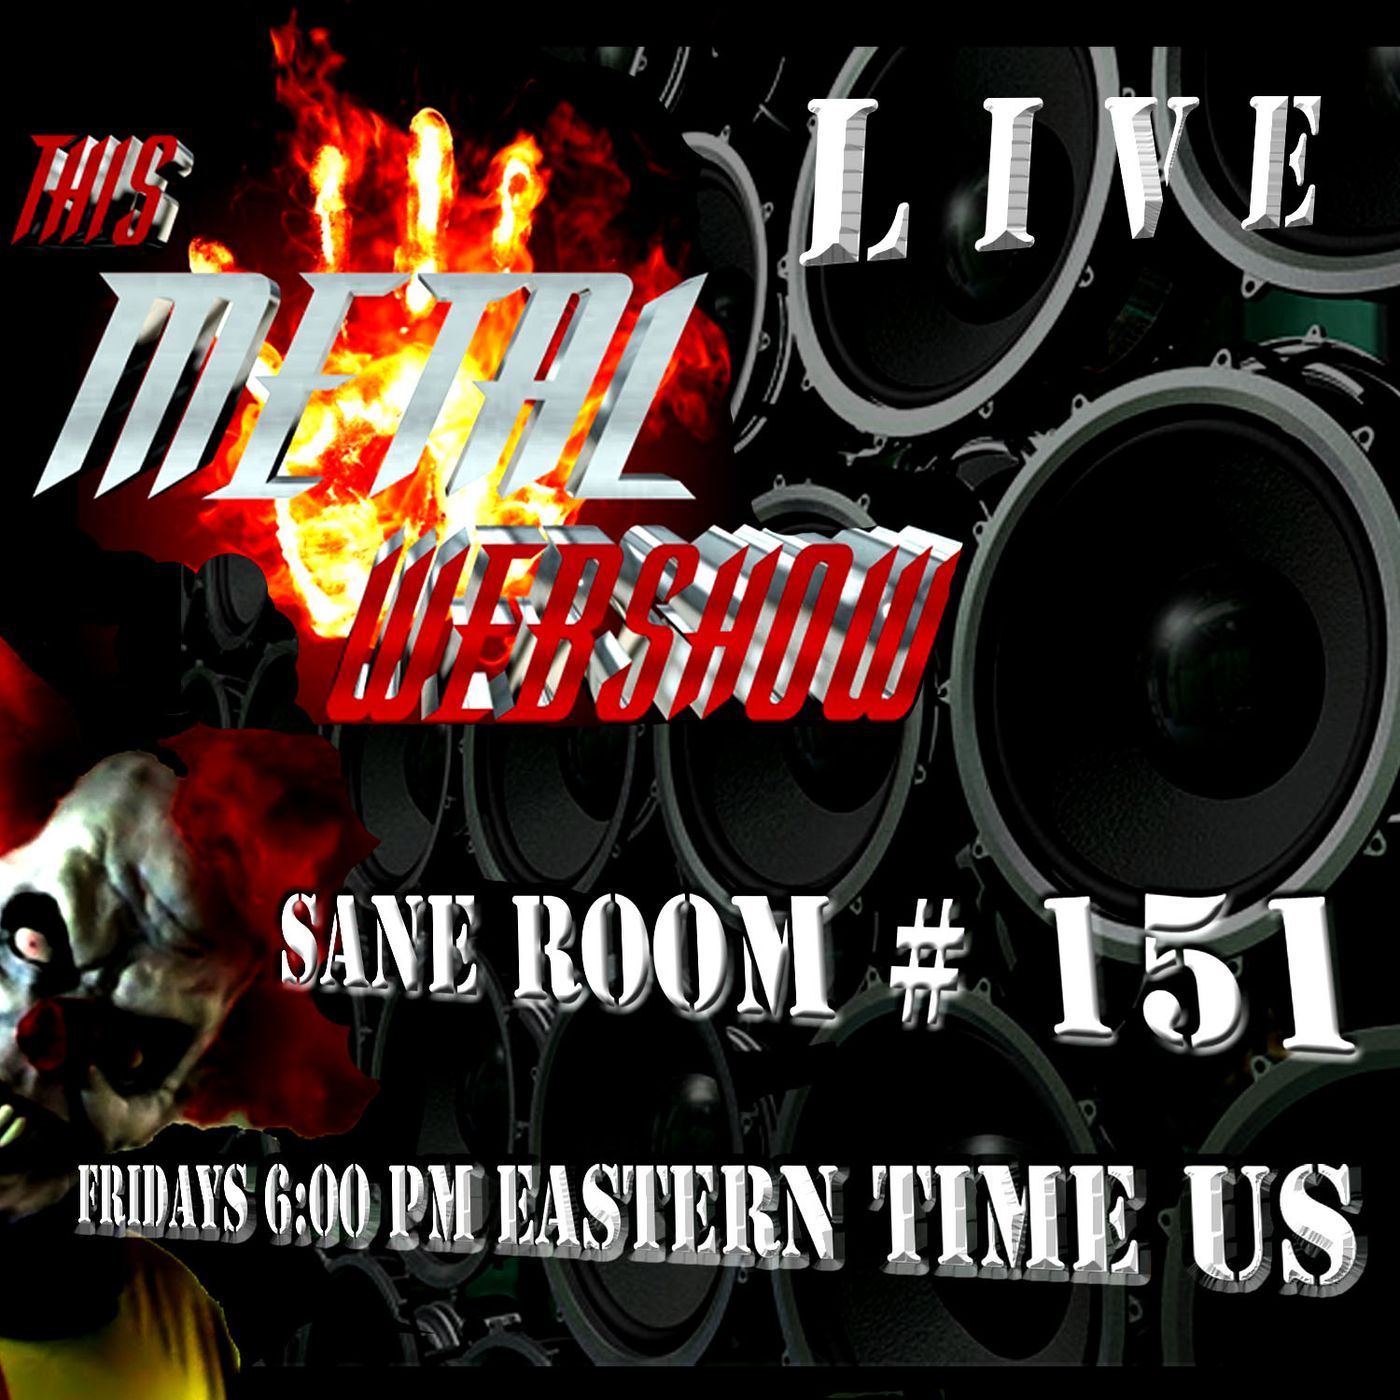 This Metal Webshow Sane Room # 151 LIVE